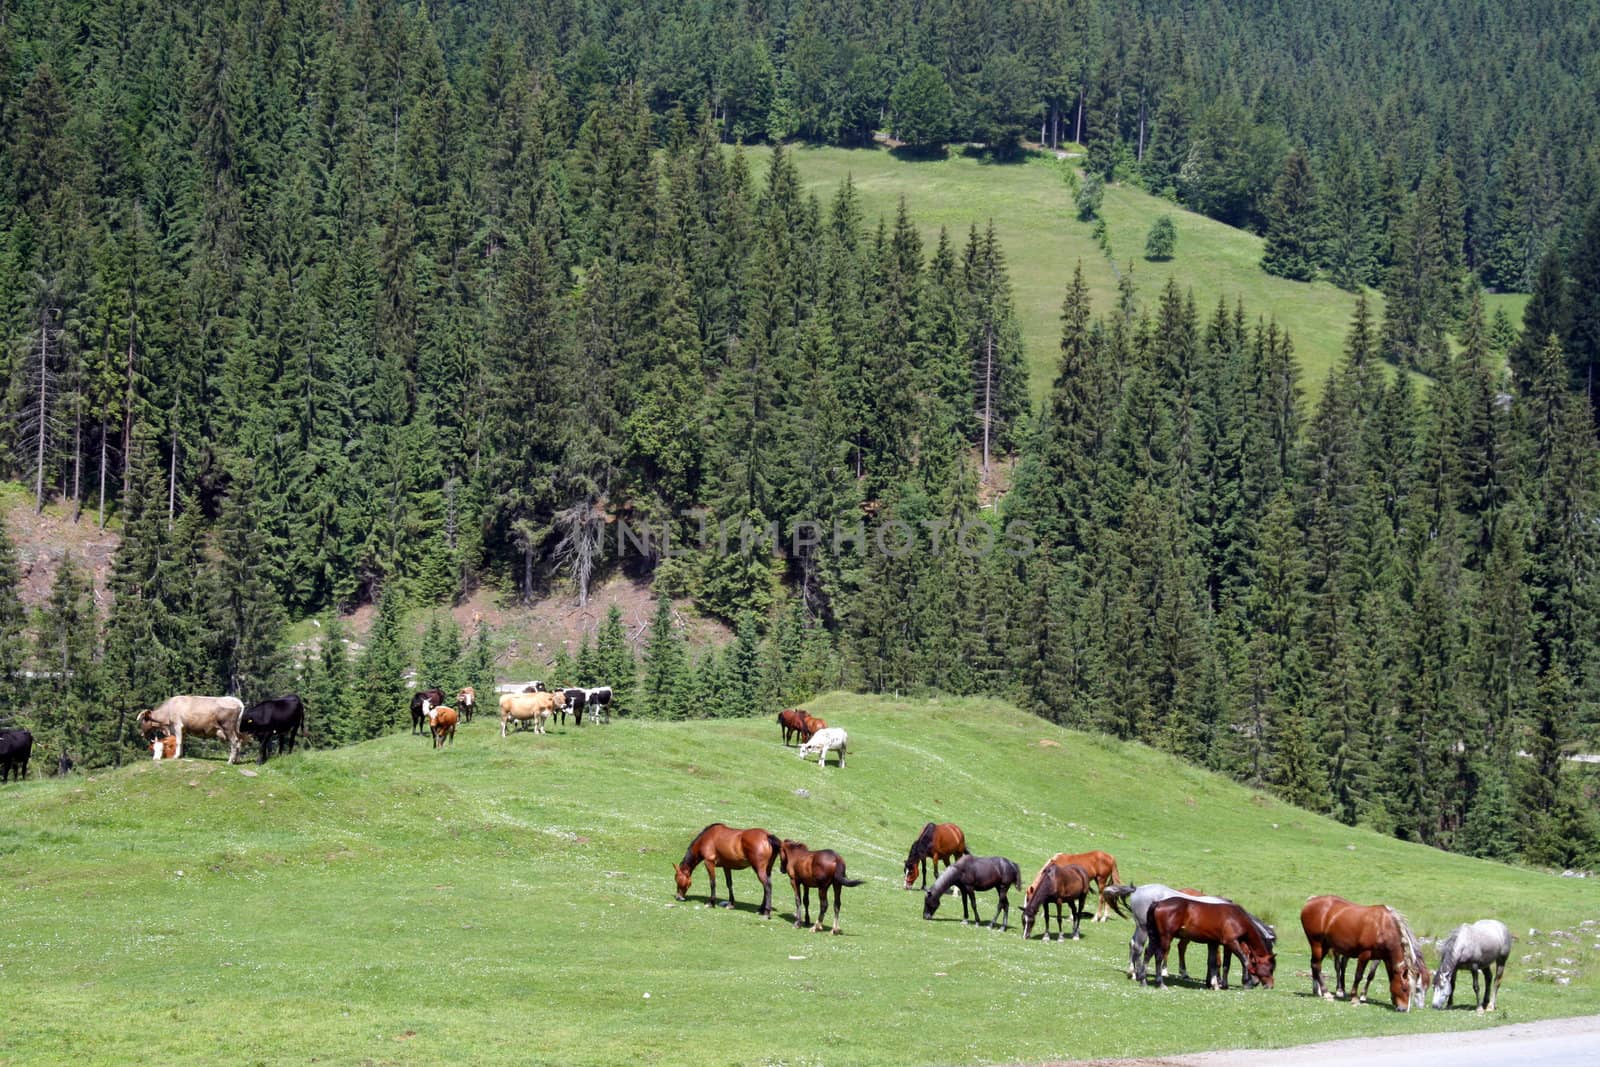 A herd of horses is grazing on the pasture, with pine trees around.